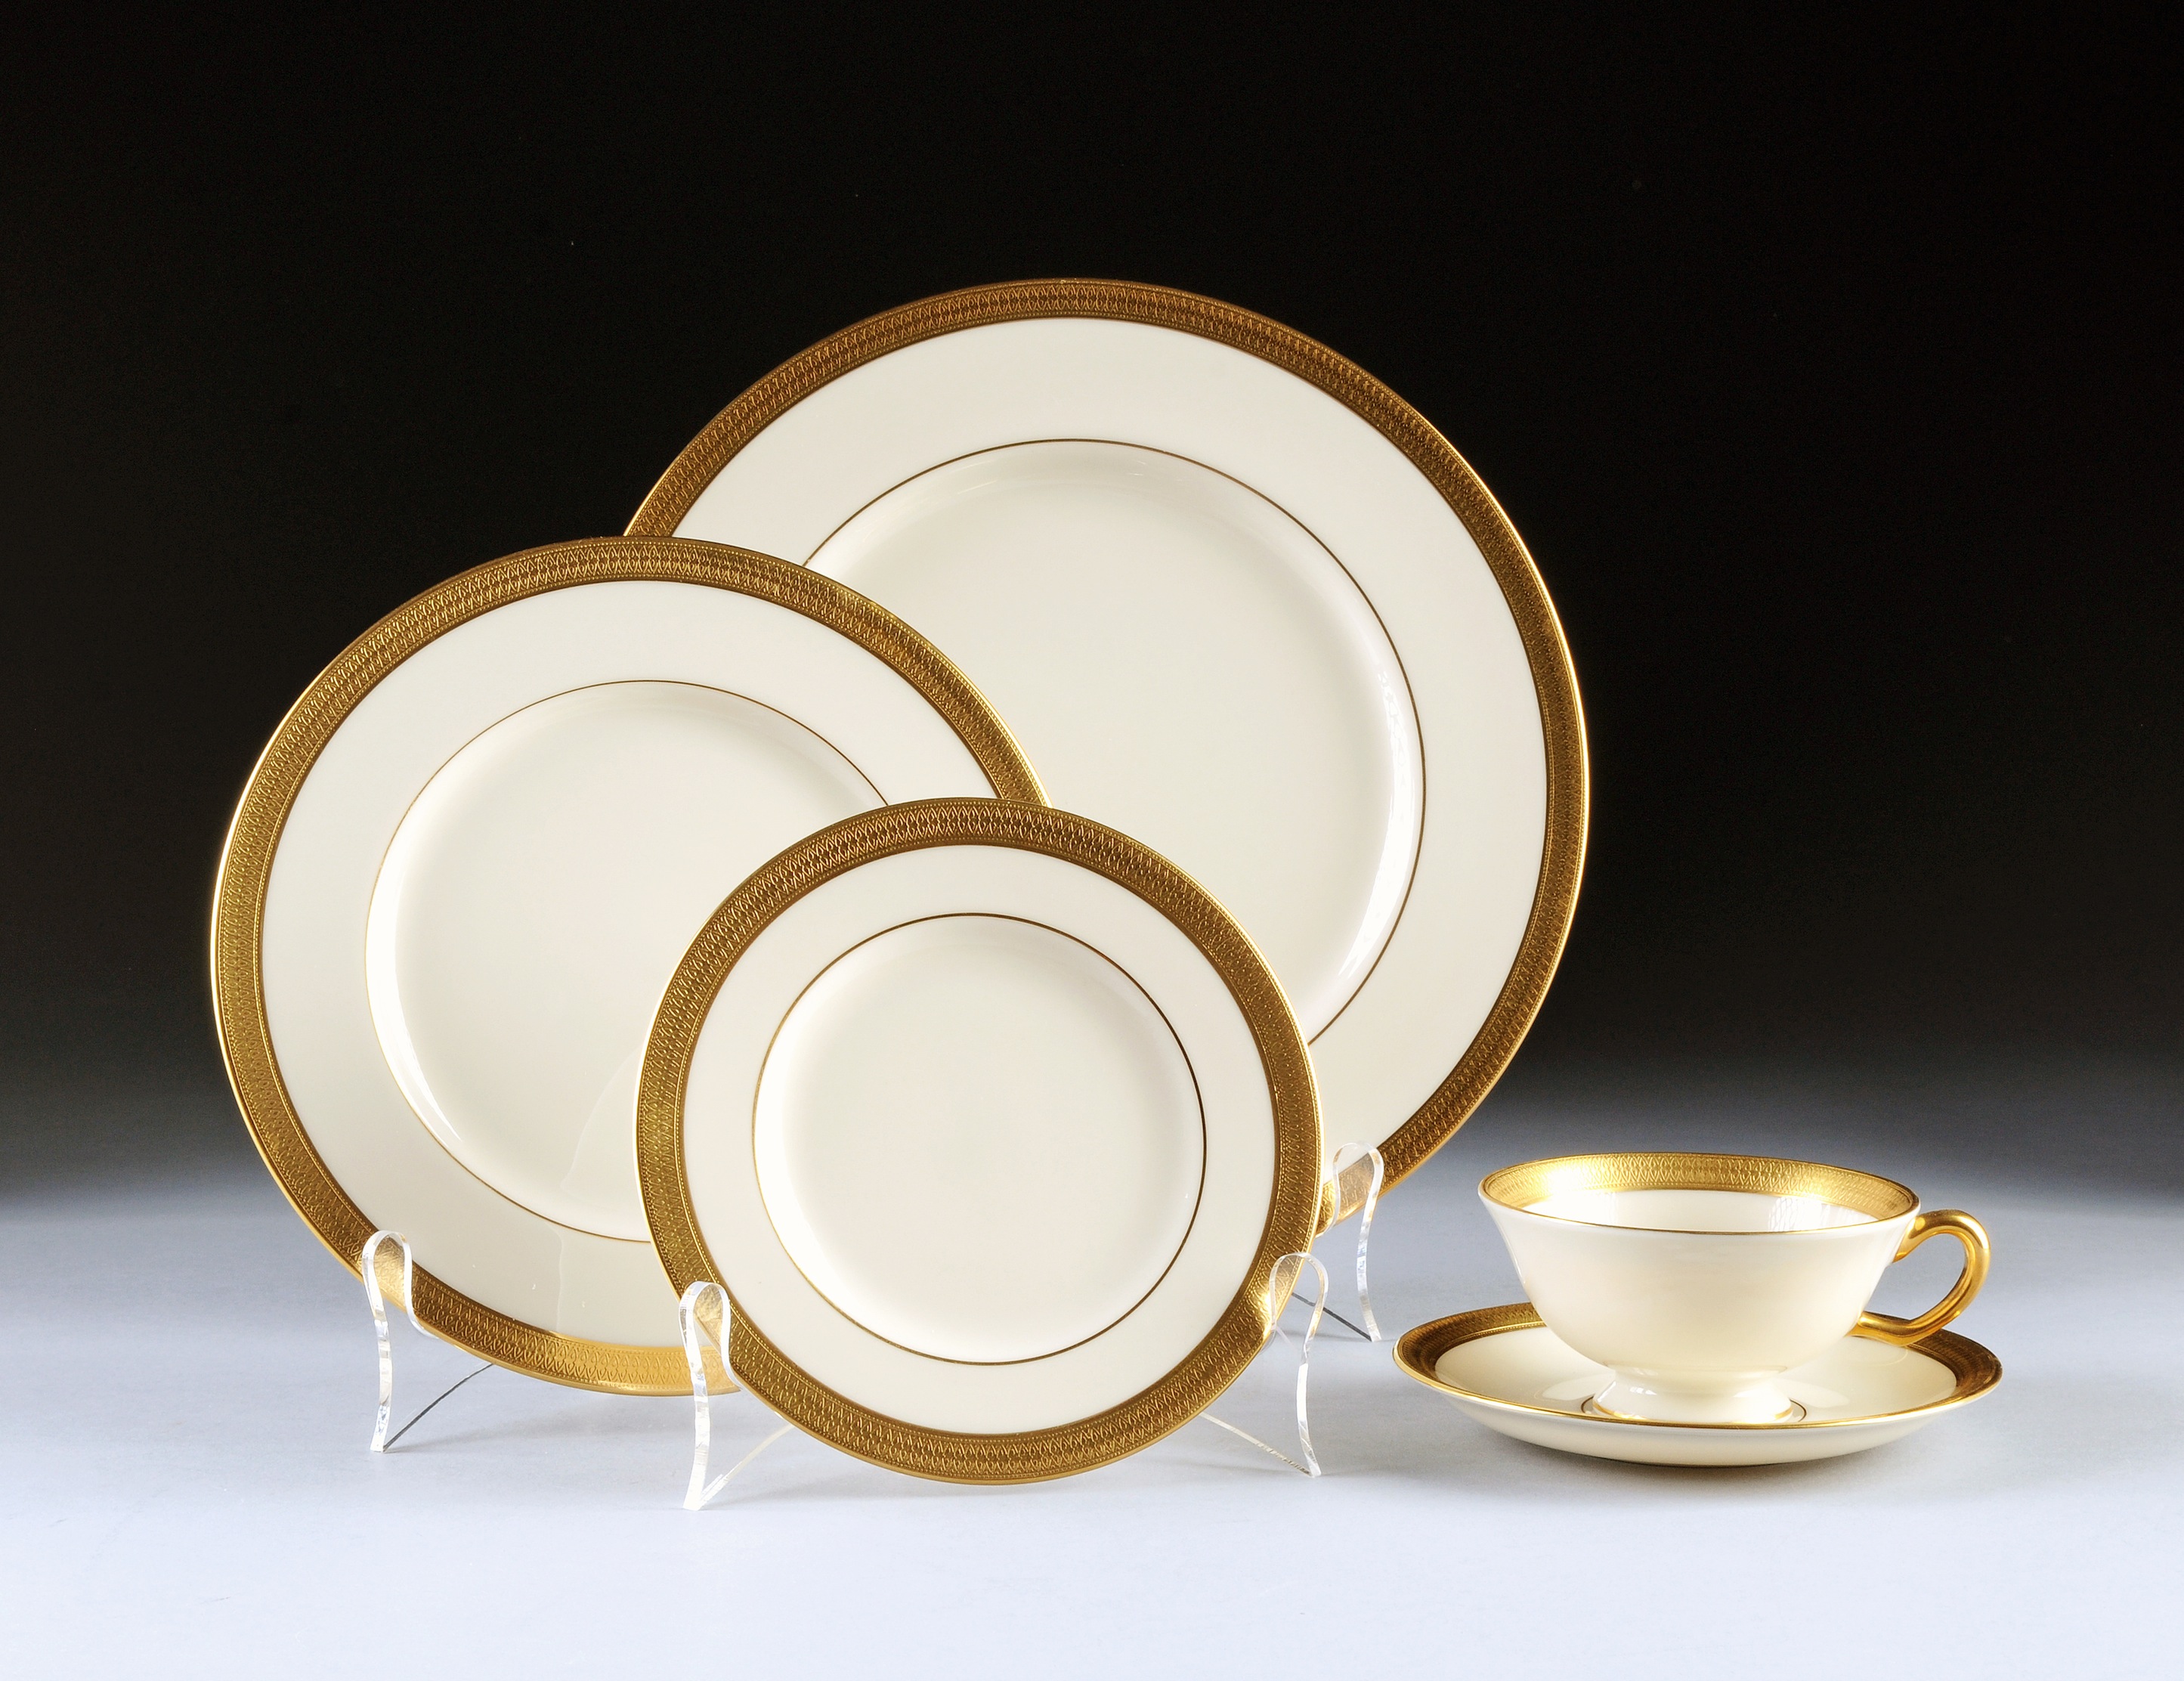 A FORTY-EIGHT PIECE LENOX PARCEL GILT IVORY GROUND DINNERWARE SERVICE, LOWELL PATTERN, in